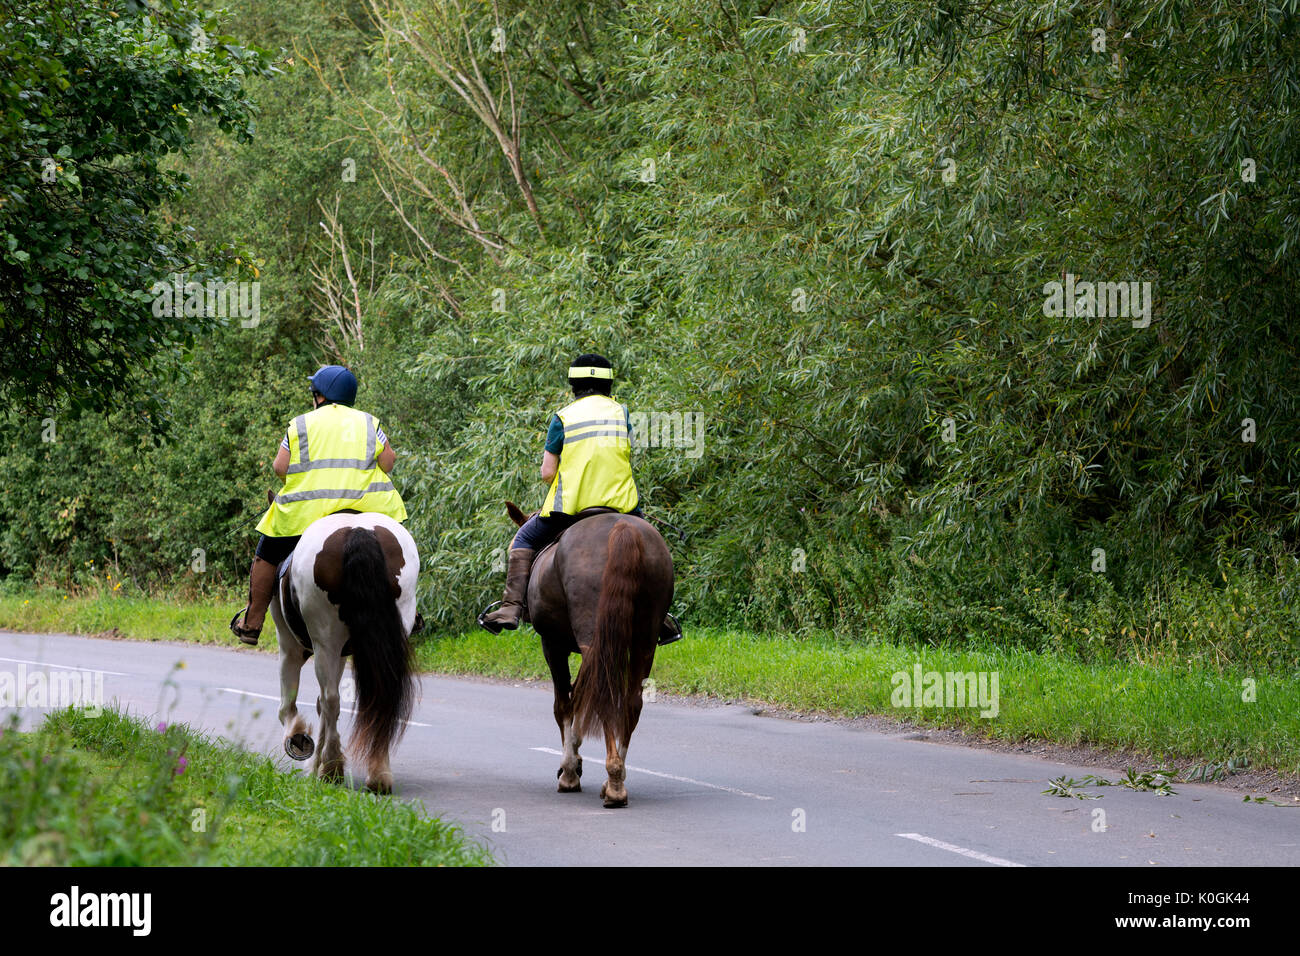 Two women riding horses on a country road, Warwickshire, UK Stock Photo